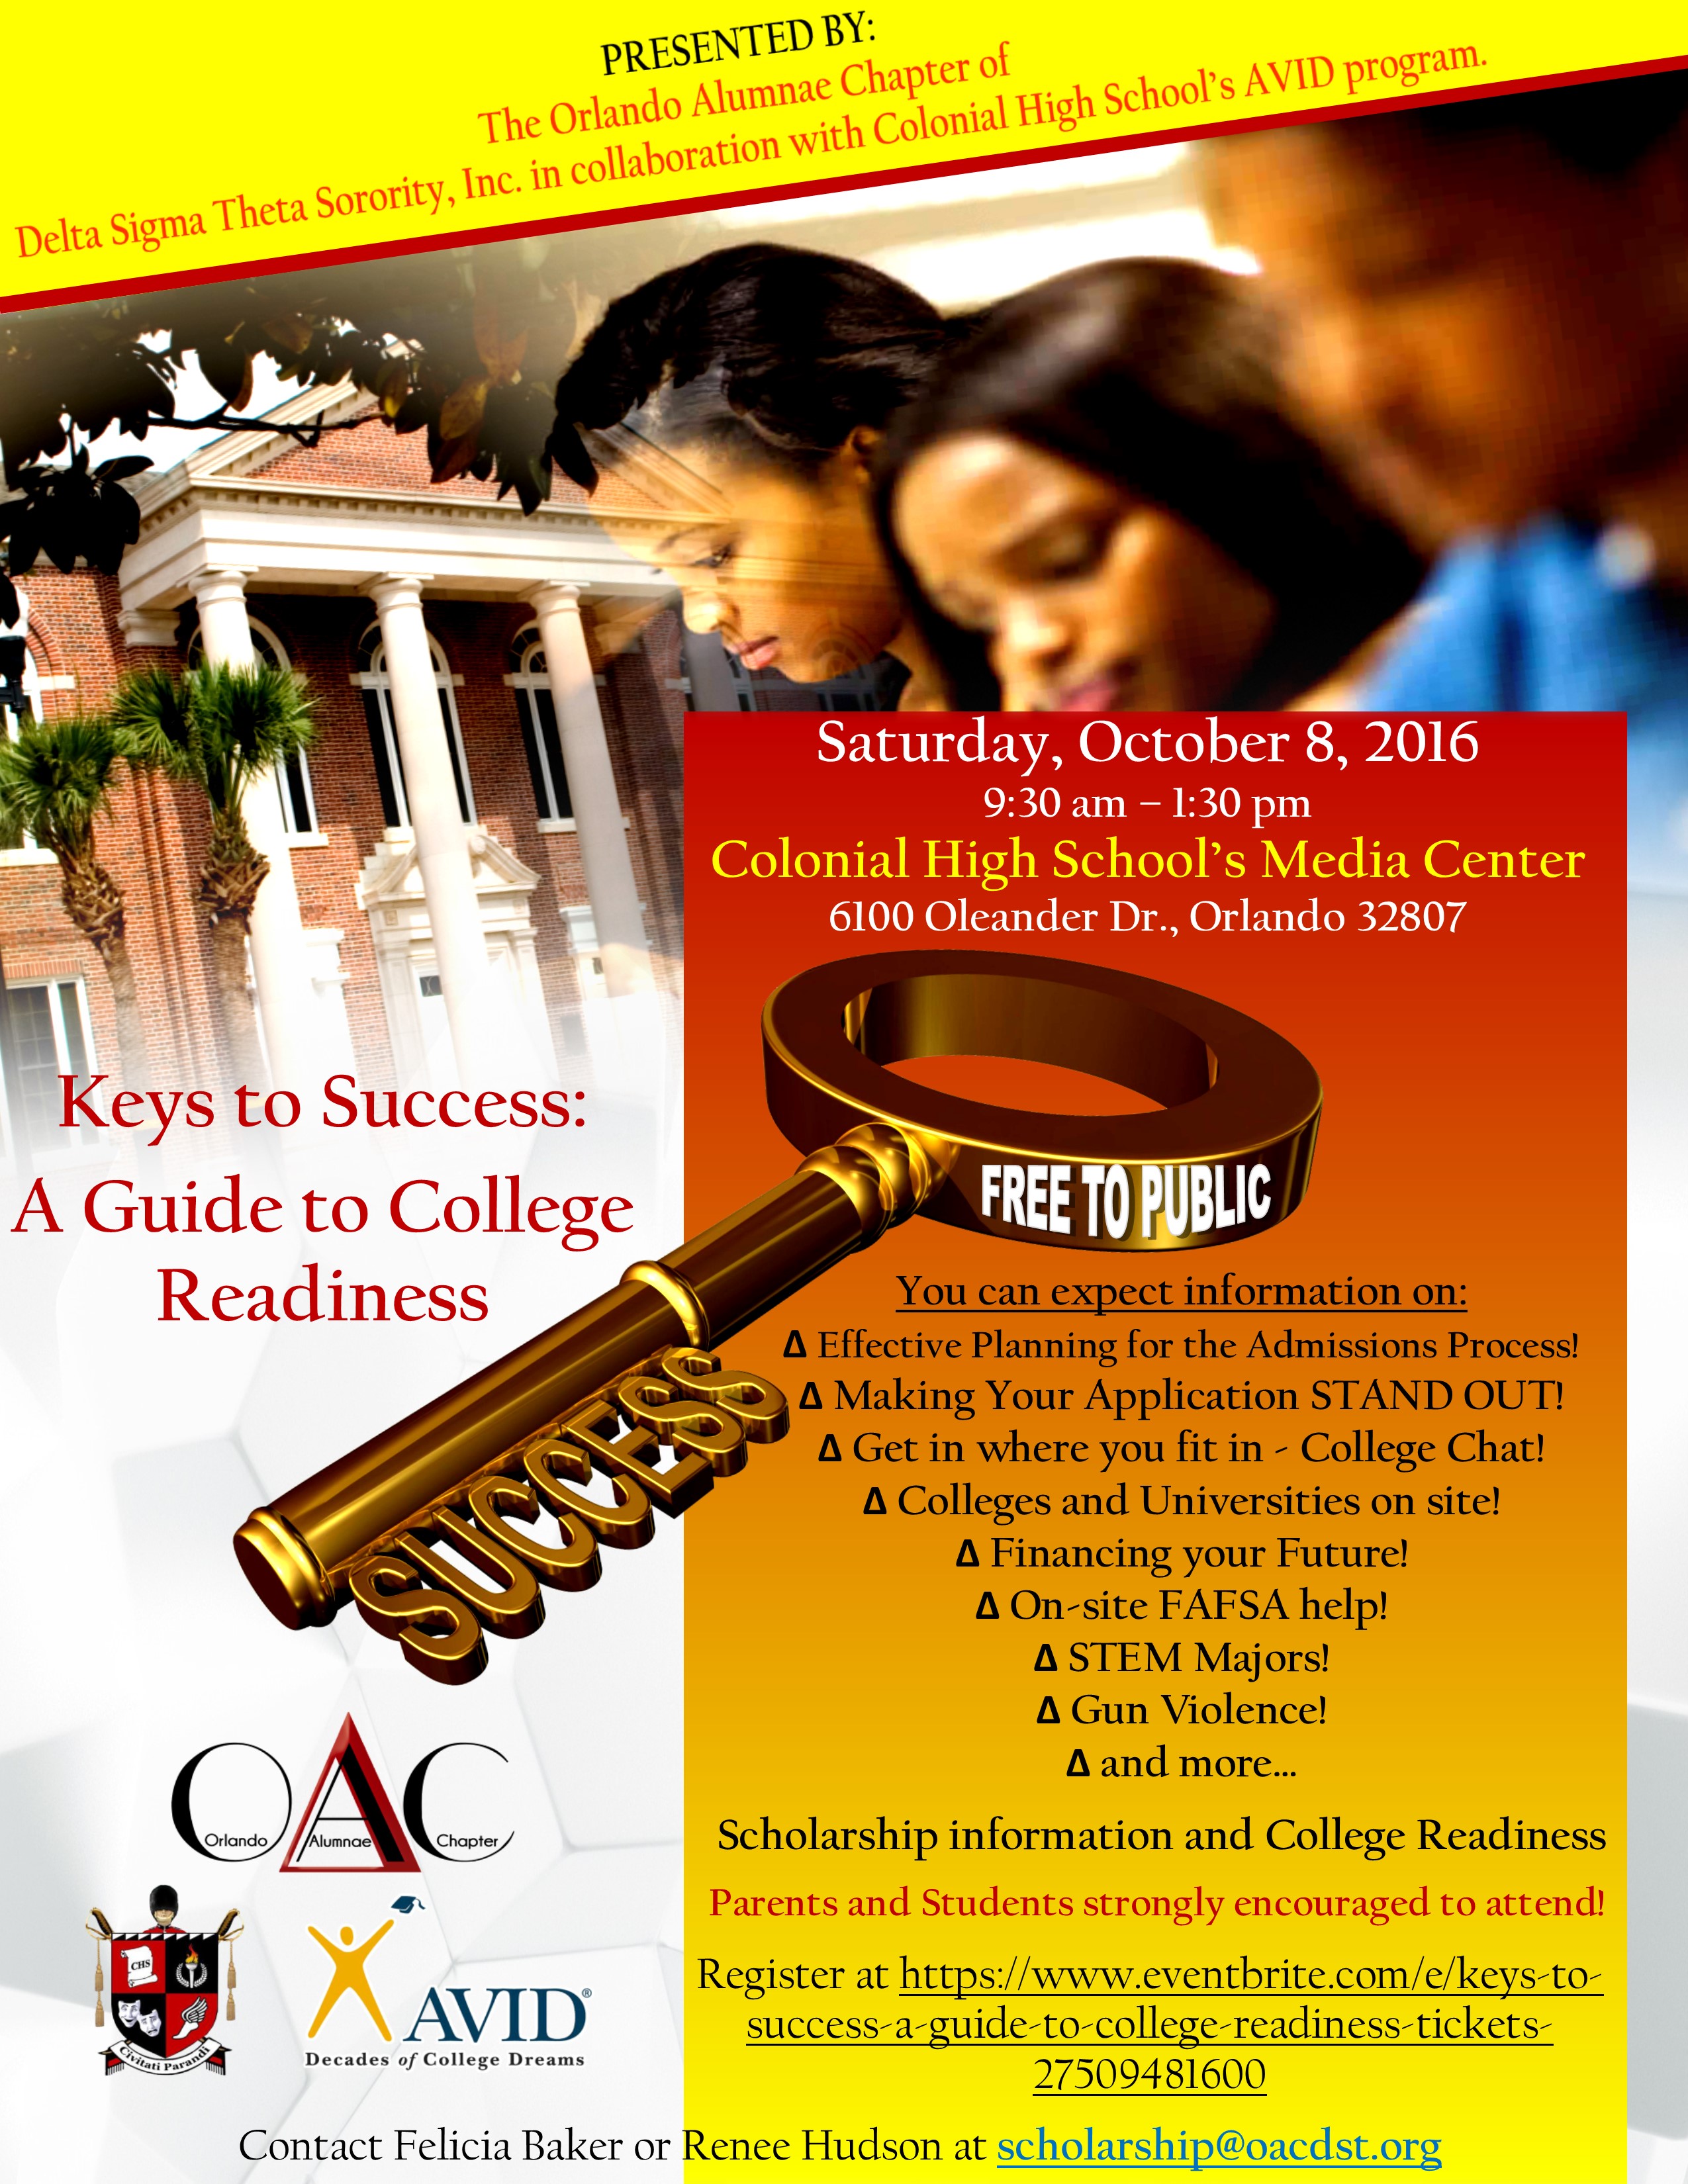 Key to Success: A Guide to College Readiness (November 2nd)